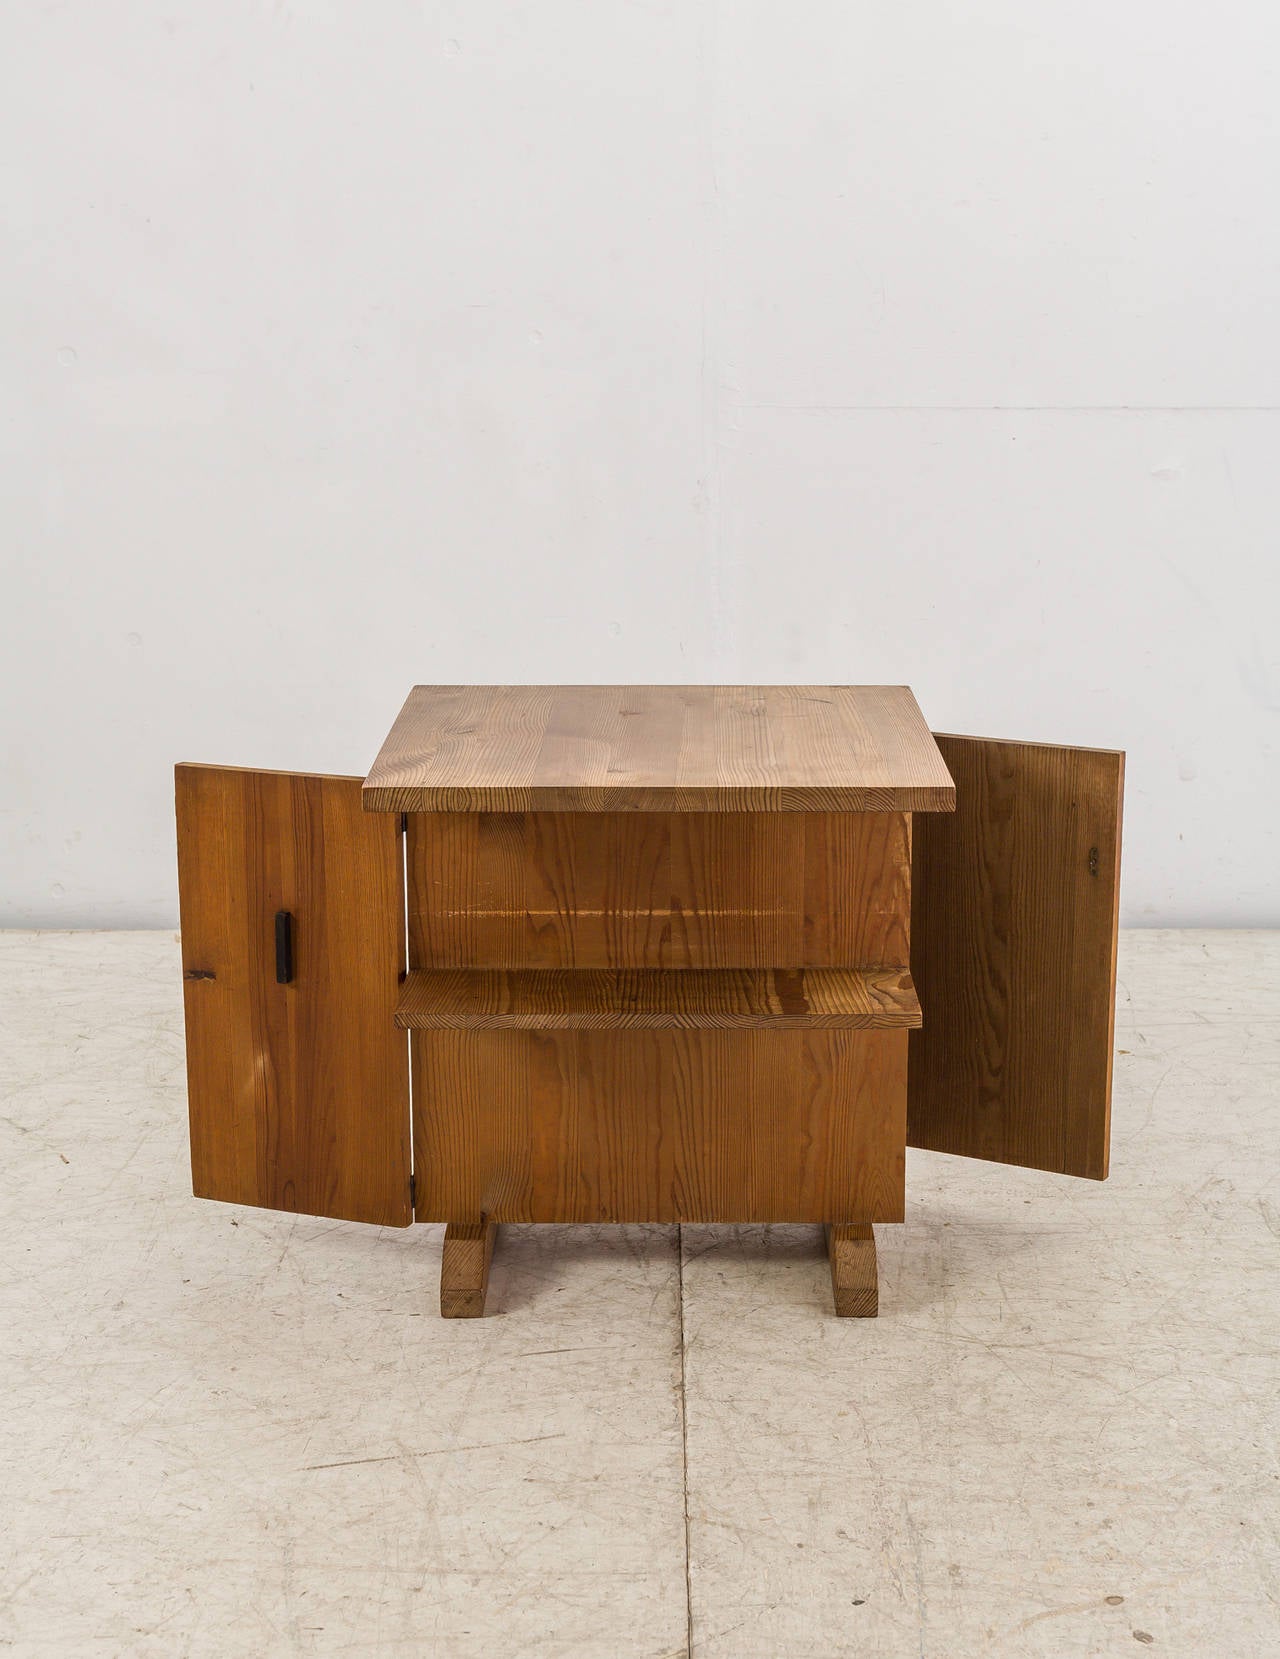 Scandinavian Modern Small Coffee Table, Mini Bar or Bedside Table in Pine from Sweden, 1930s-1940s